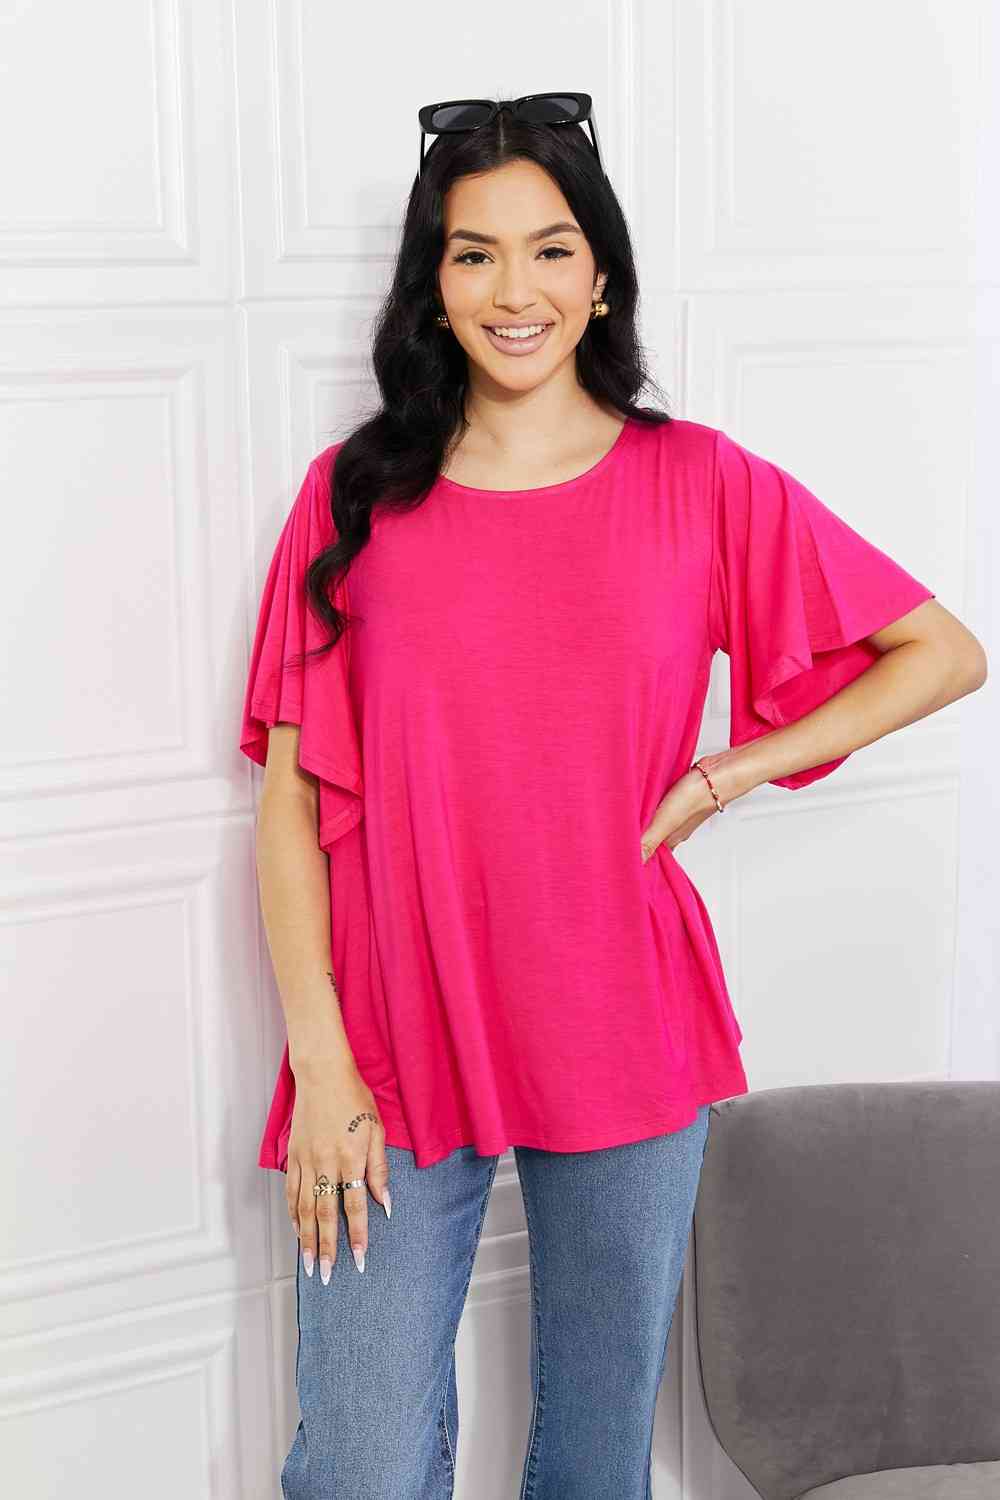 Yelete Full Size More Than Words Flutter Sleeve Top